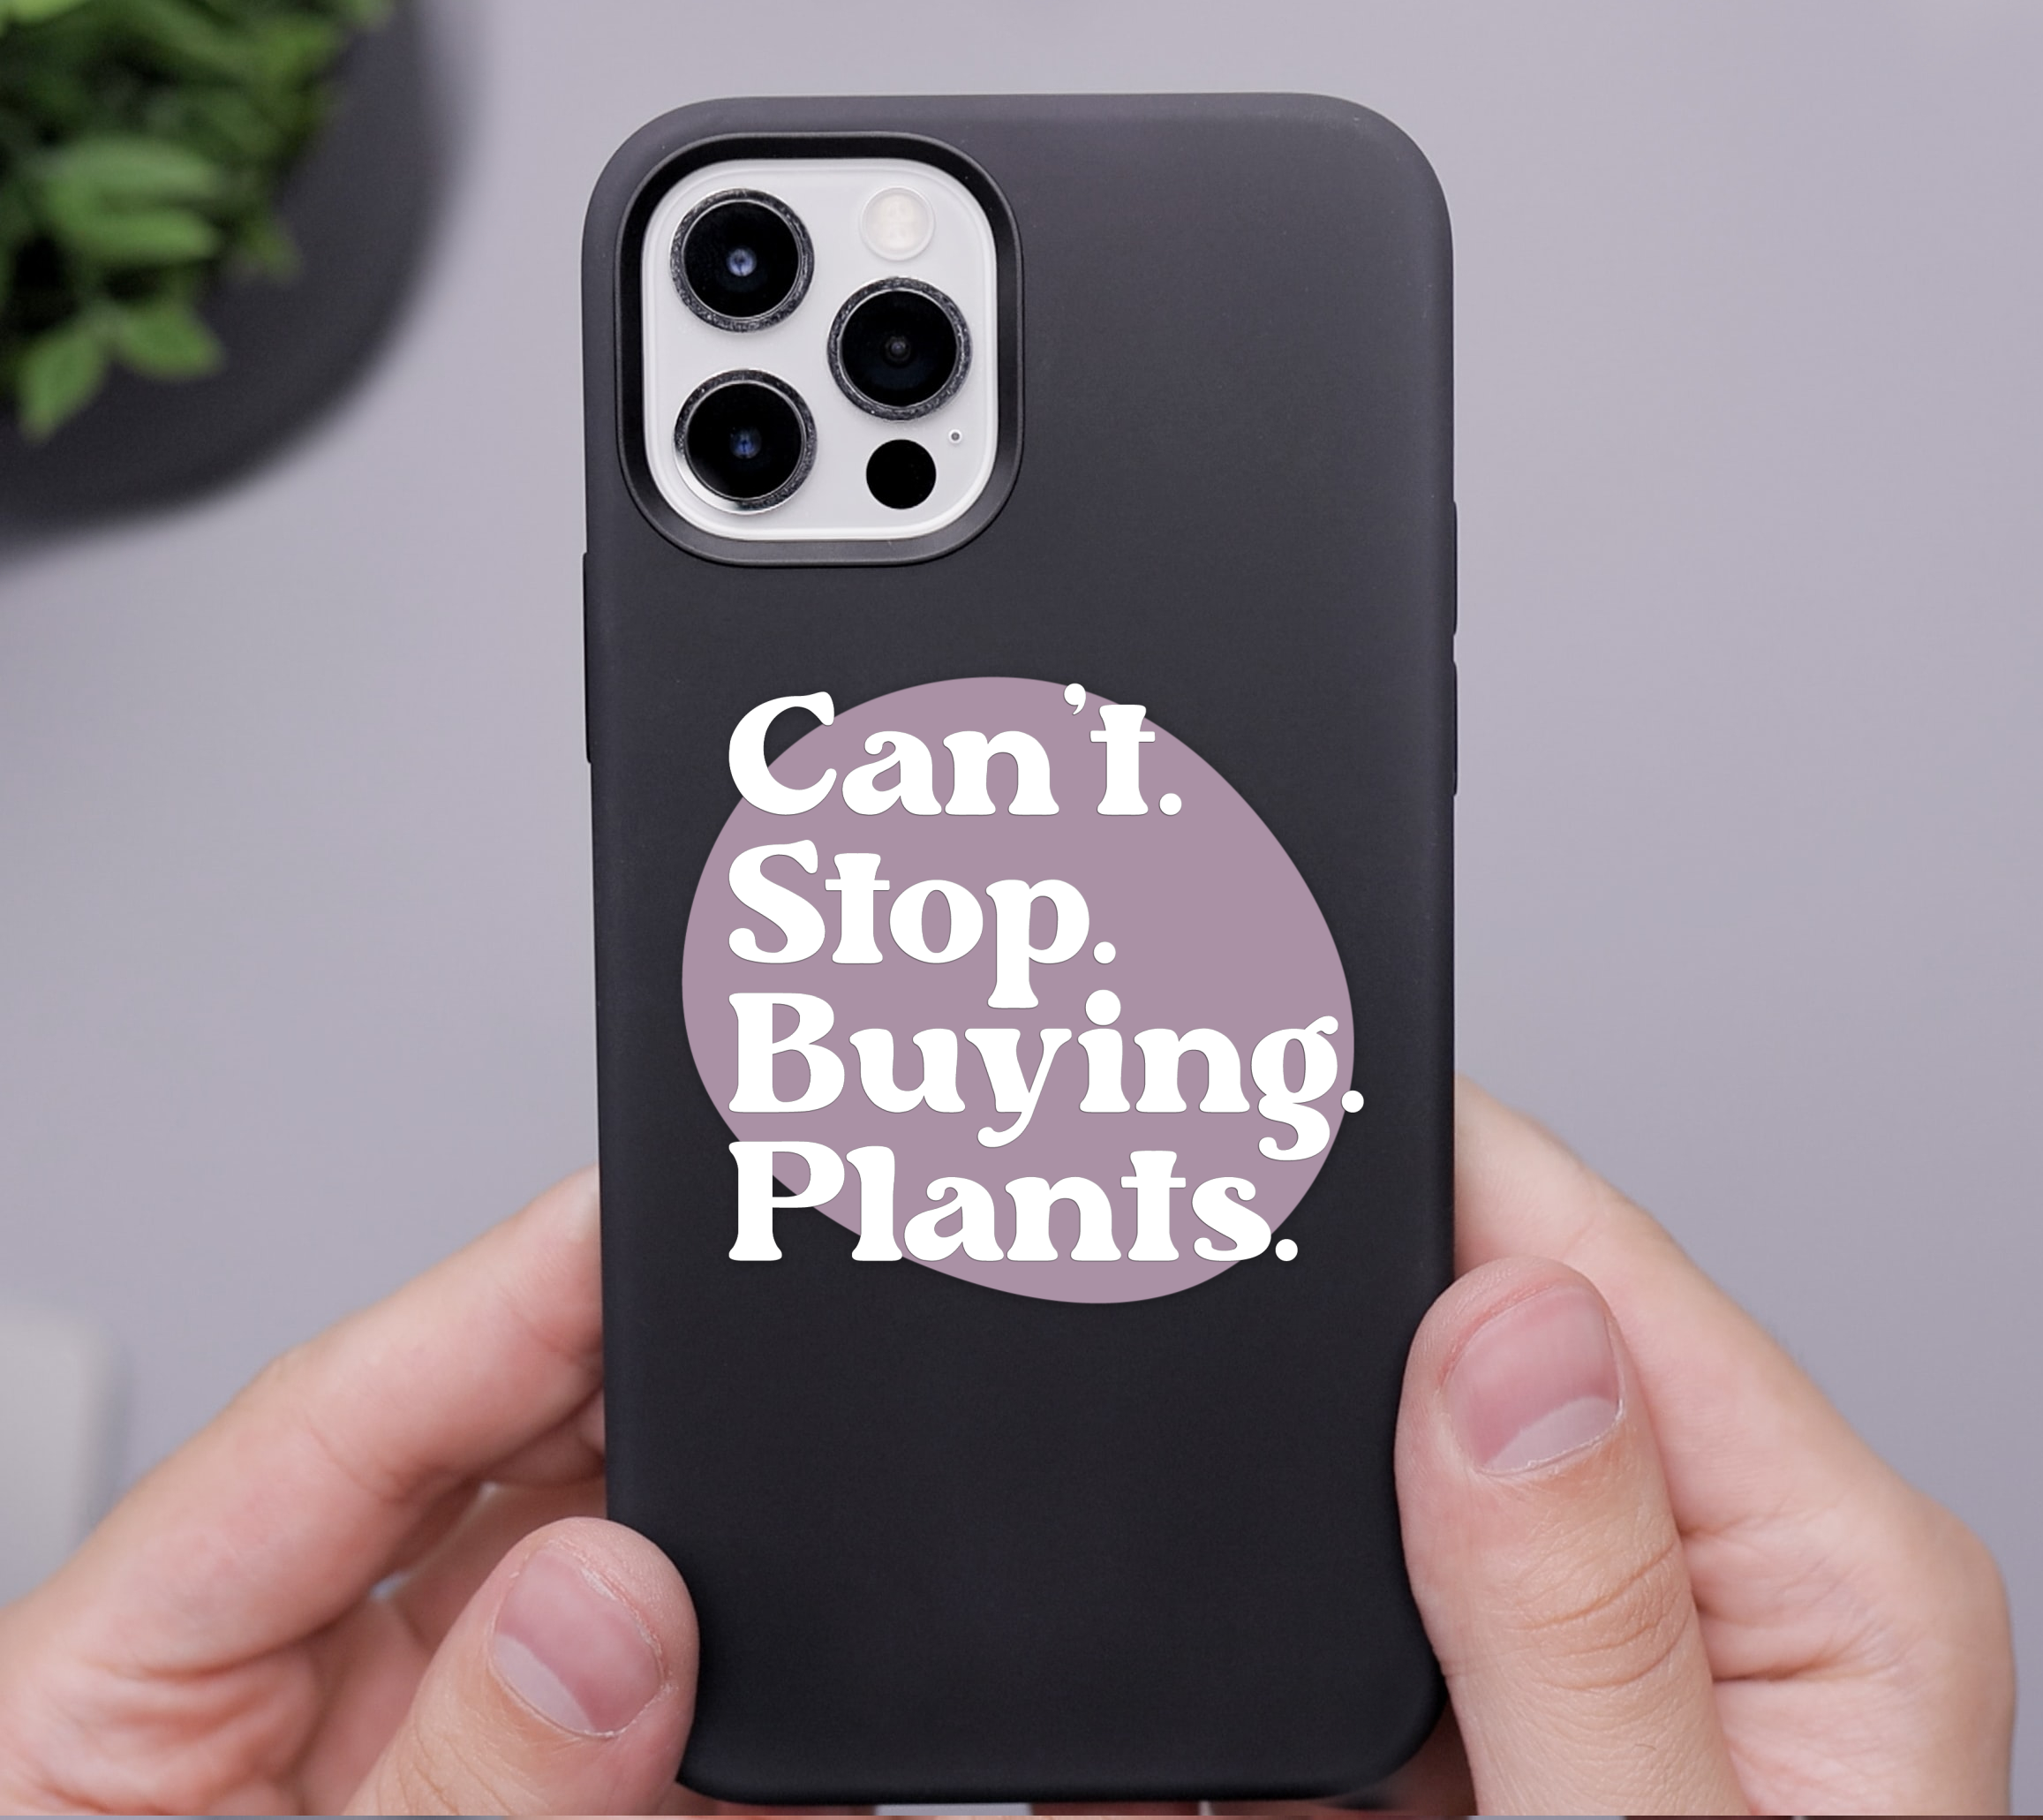 White man's hands holding an iPhone with a Can't Stop Buying Plants sticker on the case.